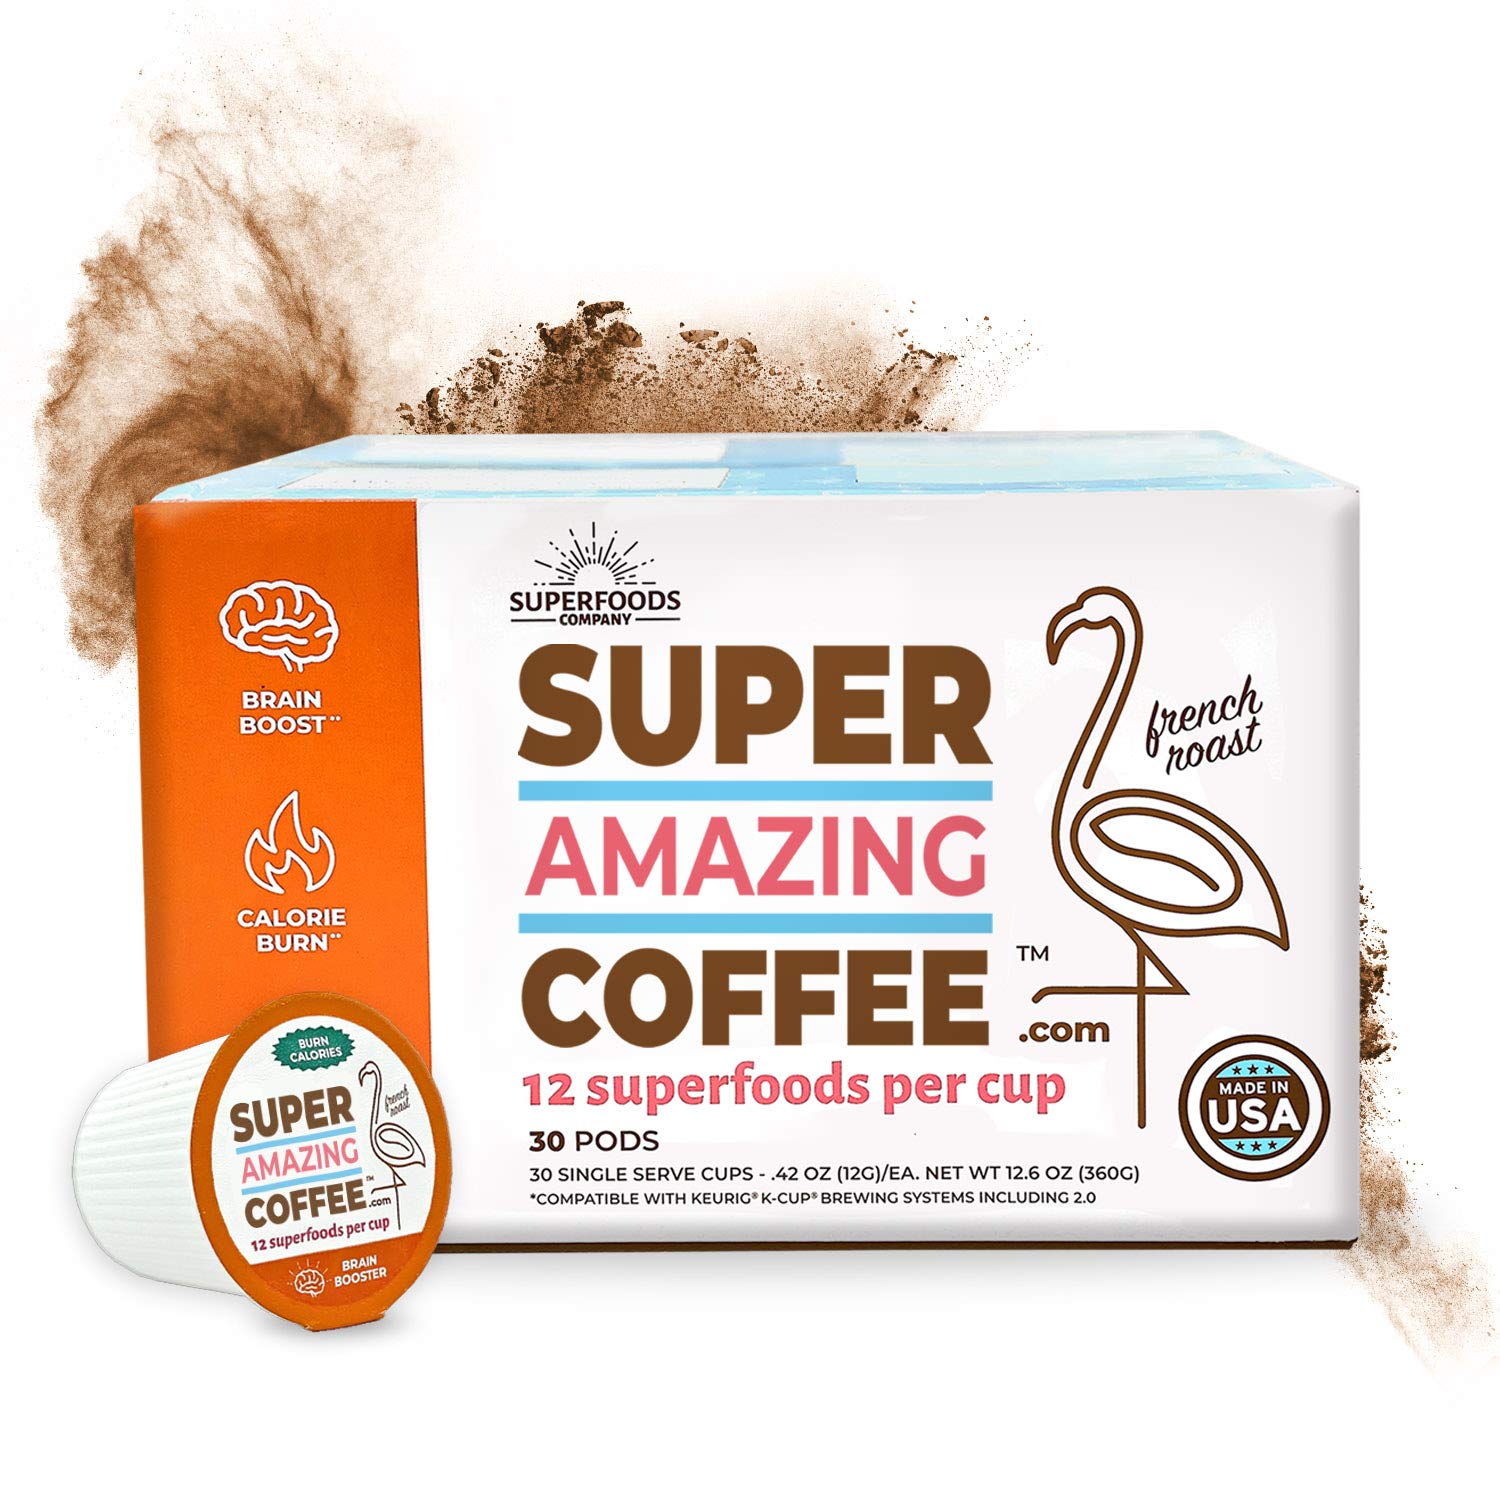 Super Amazing Coffee Ultimate Weight Loss, Brain Boost, French Roast Coffee Pods with Cocoa, 12 Natural Superfoods, Gluten Free, Non-GMO, Sugar Fre...